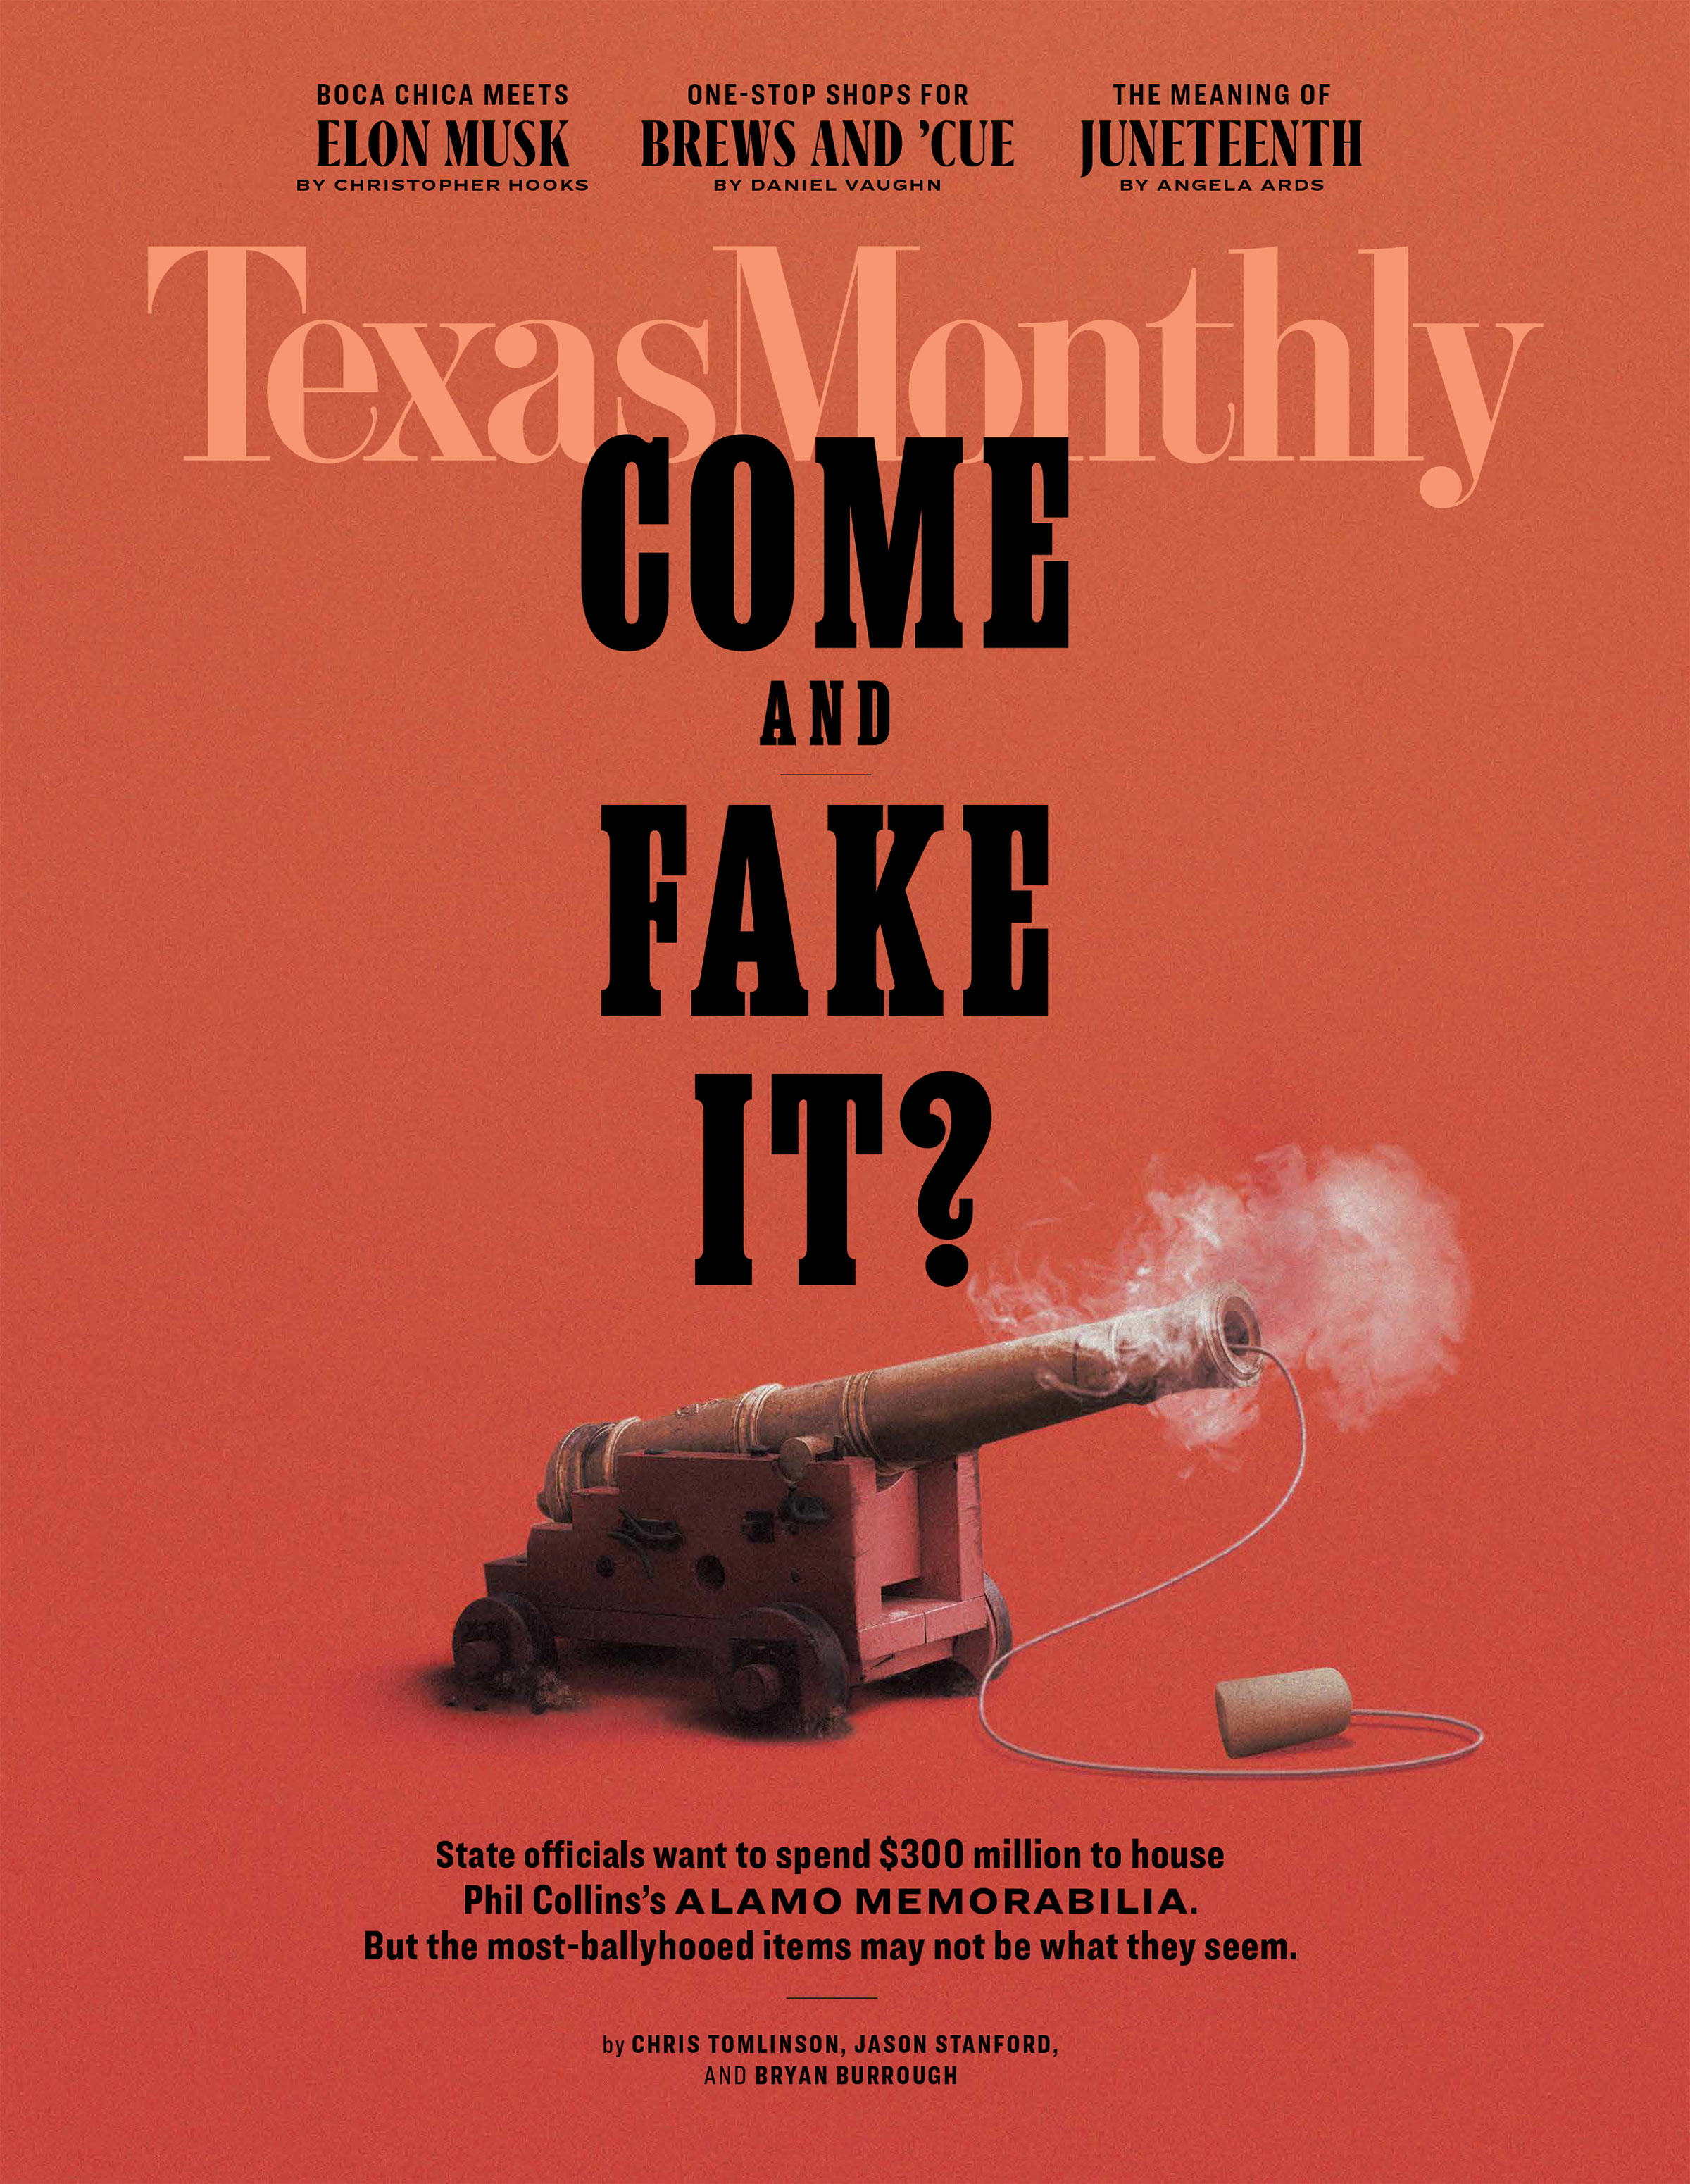 The Next Battle of the Alamo! – Texas Monthly